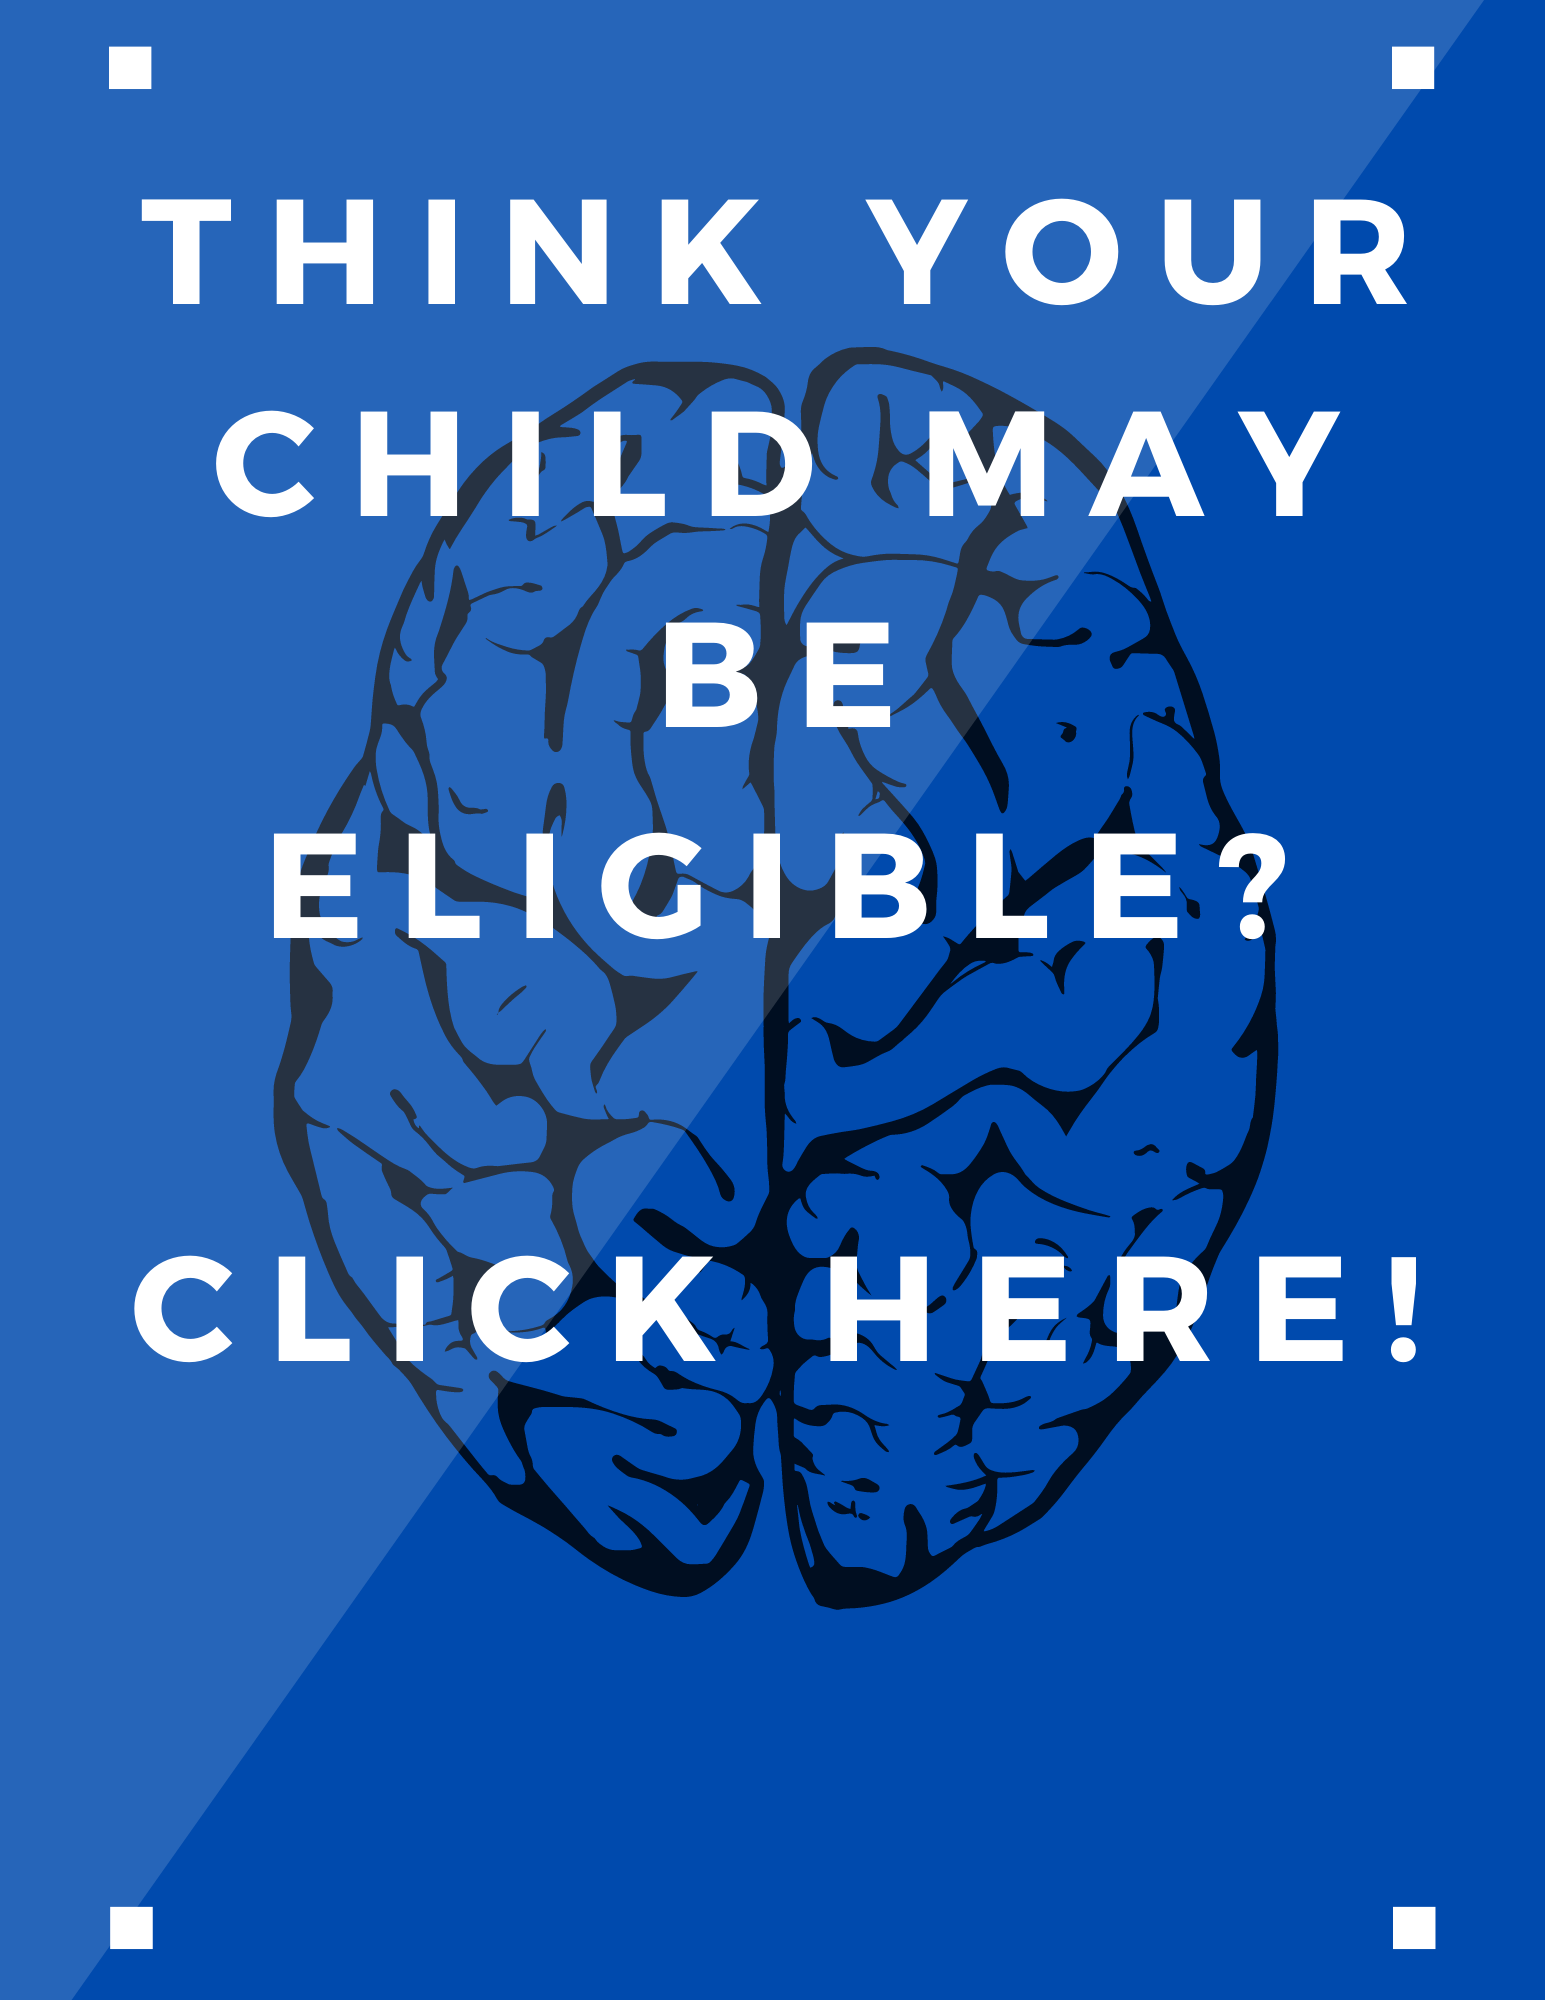 Think your child is eligible?